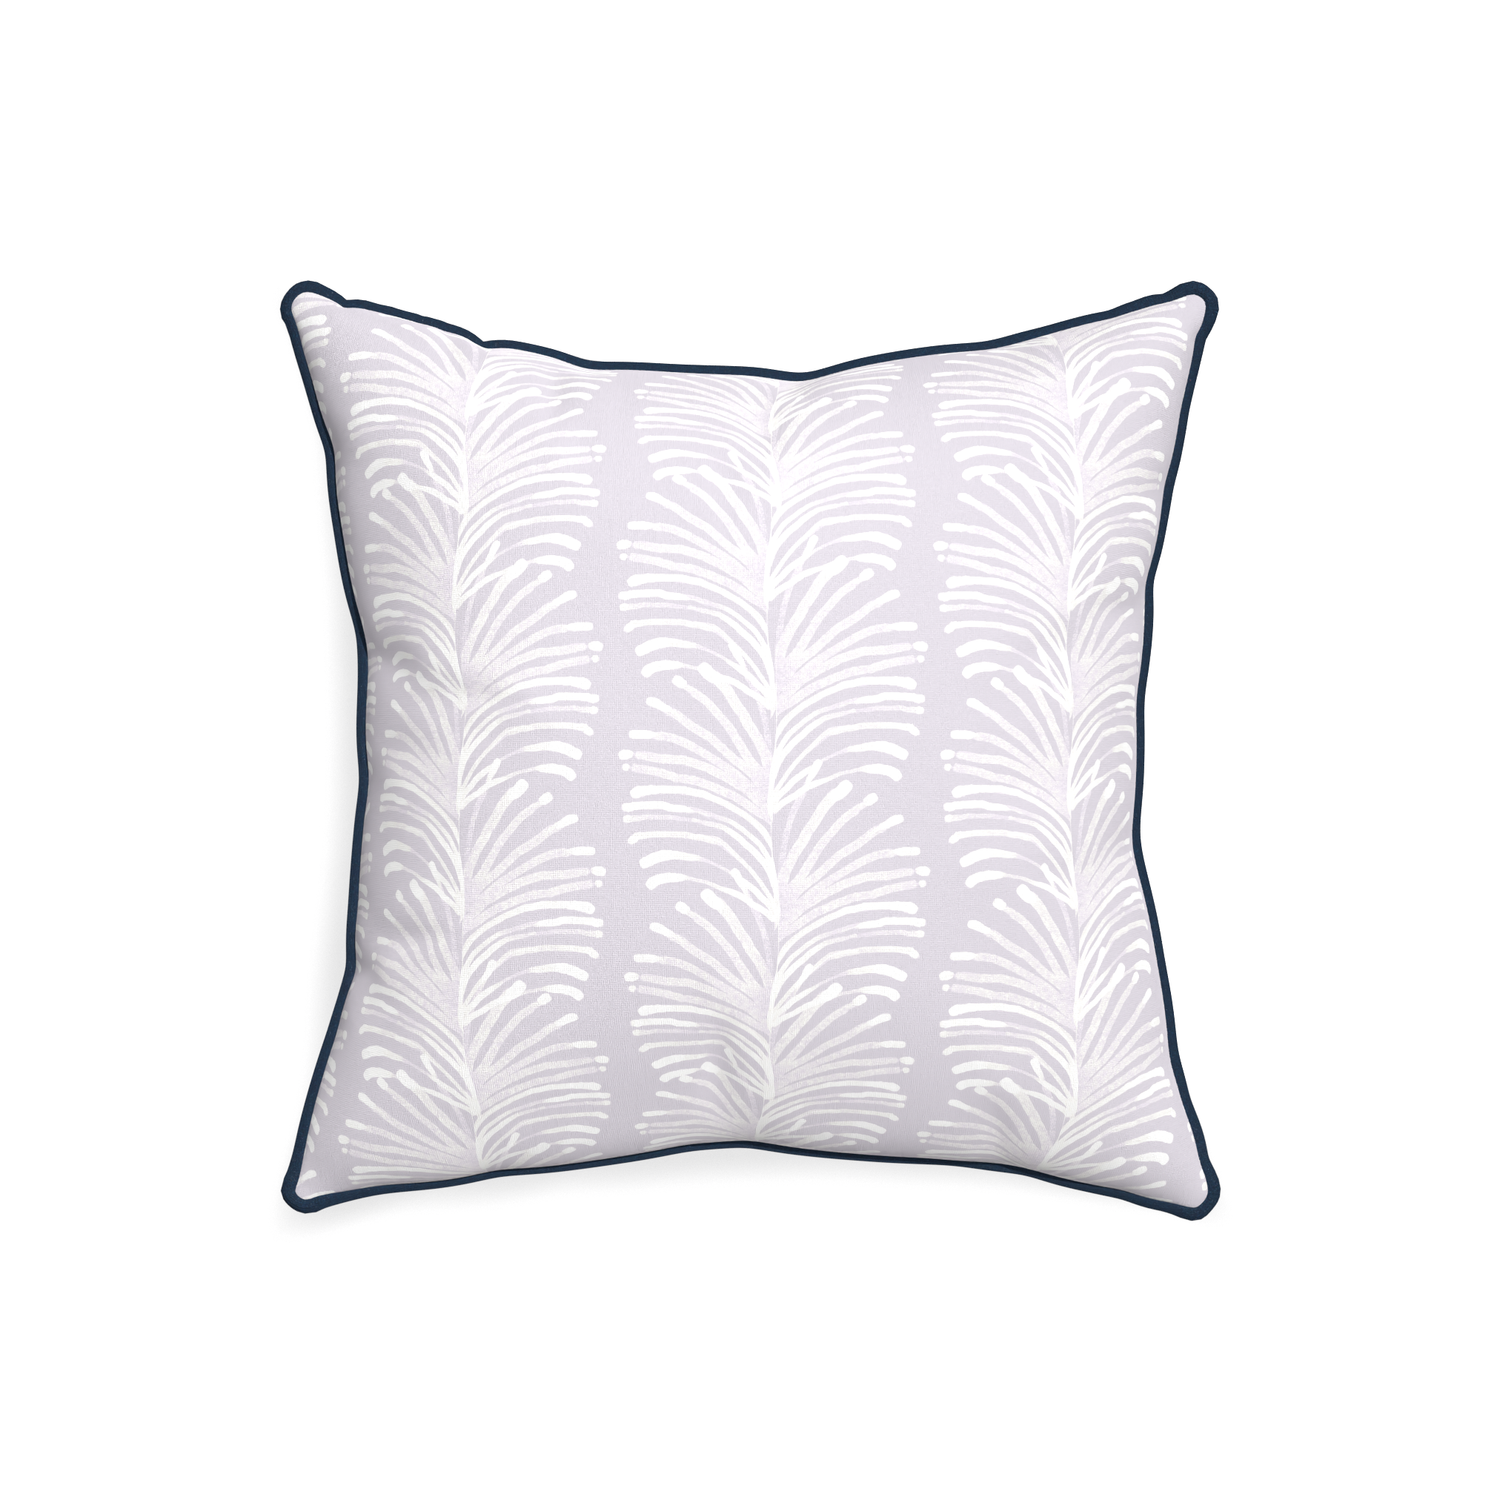 20-square emma lavender custom lavender botanical stripepillow with c piping on white background